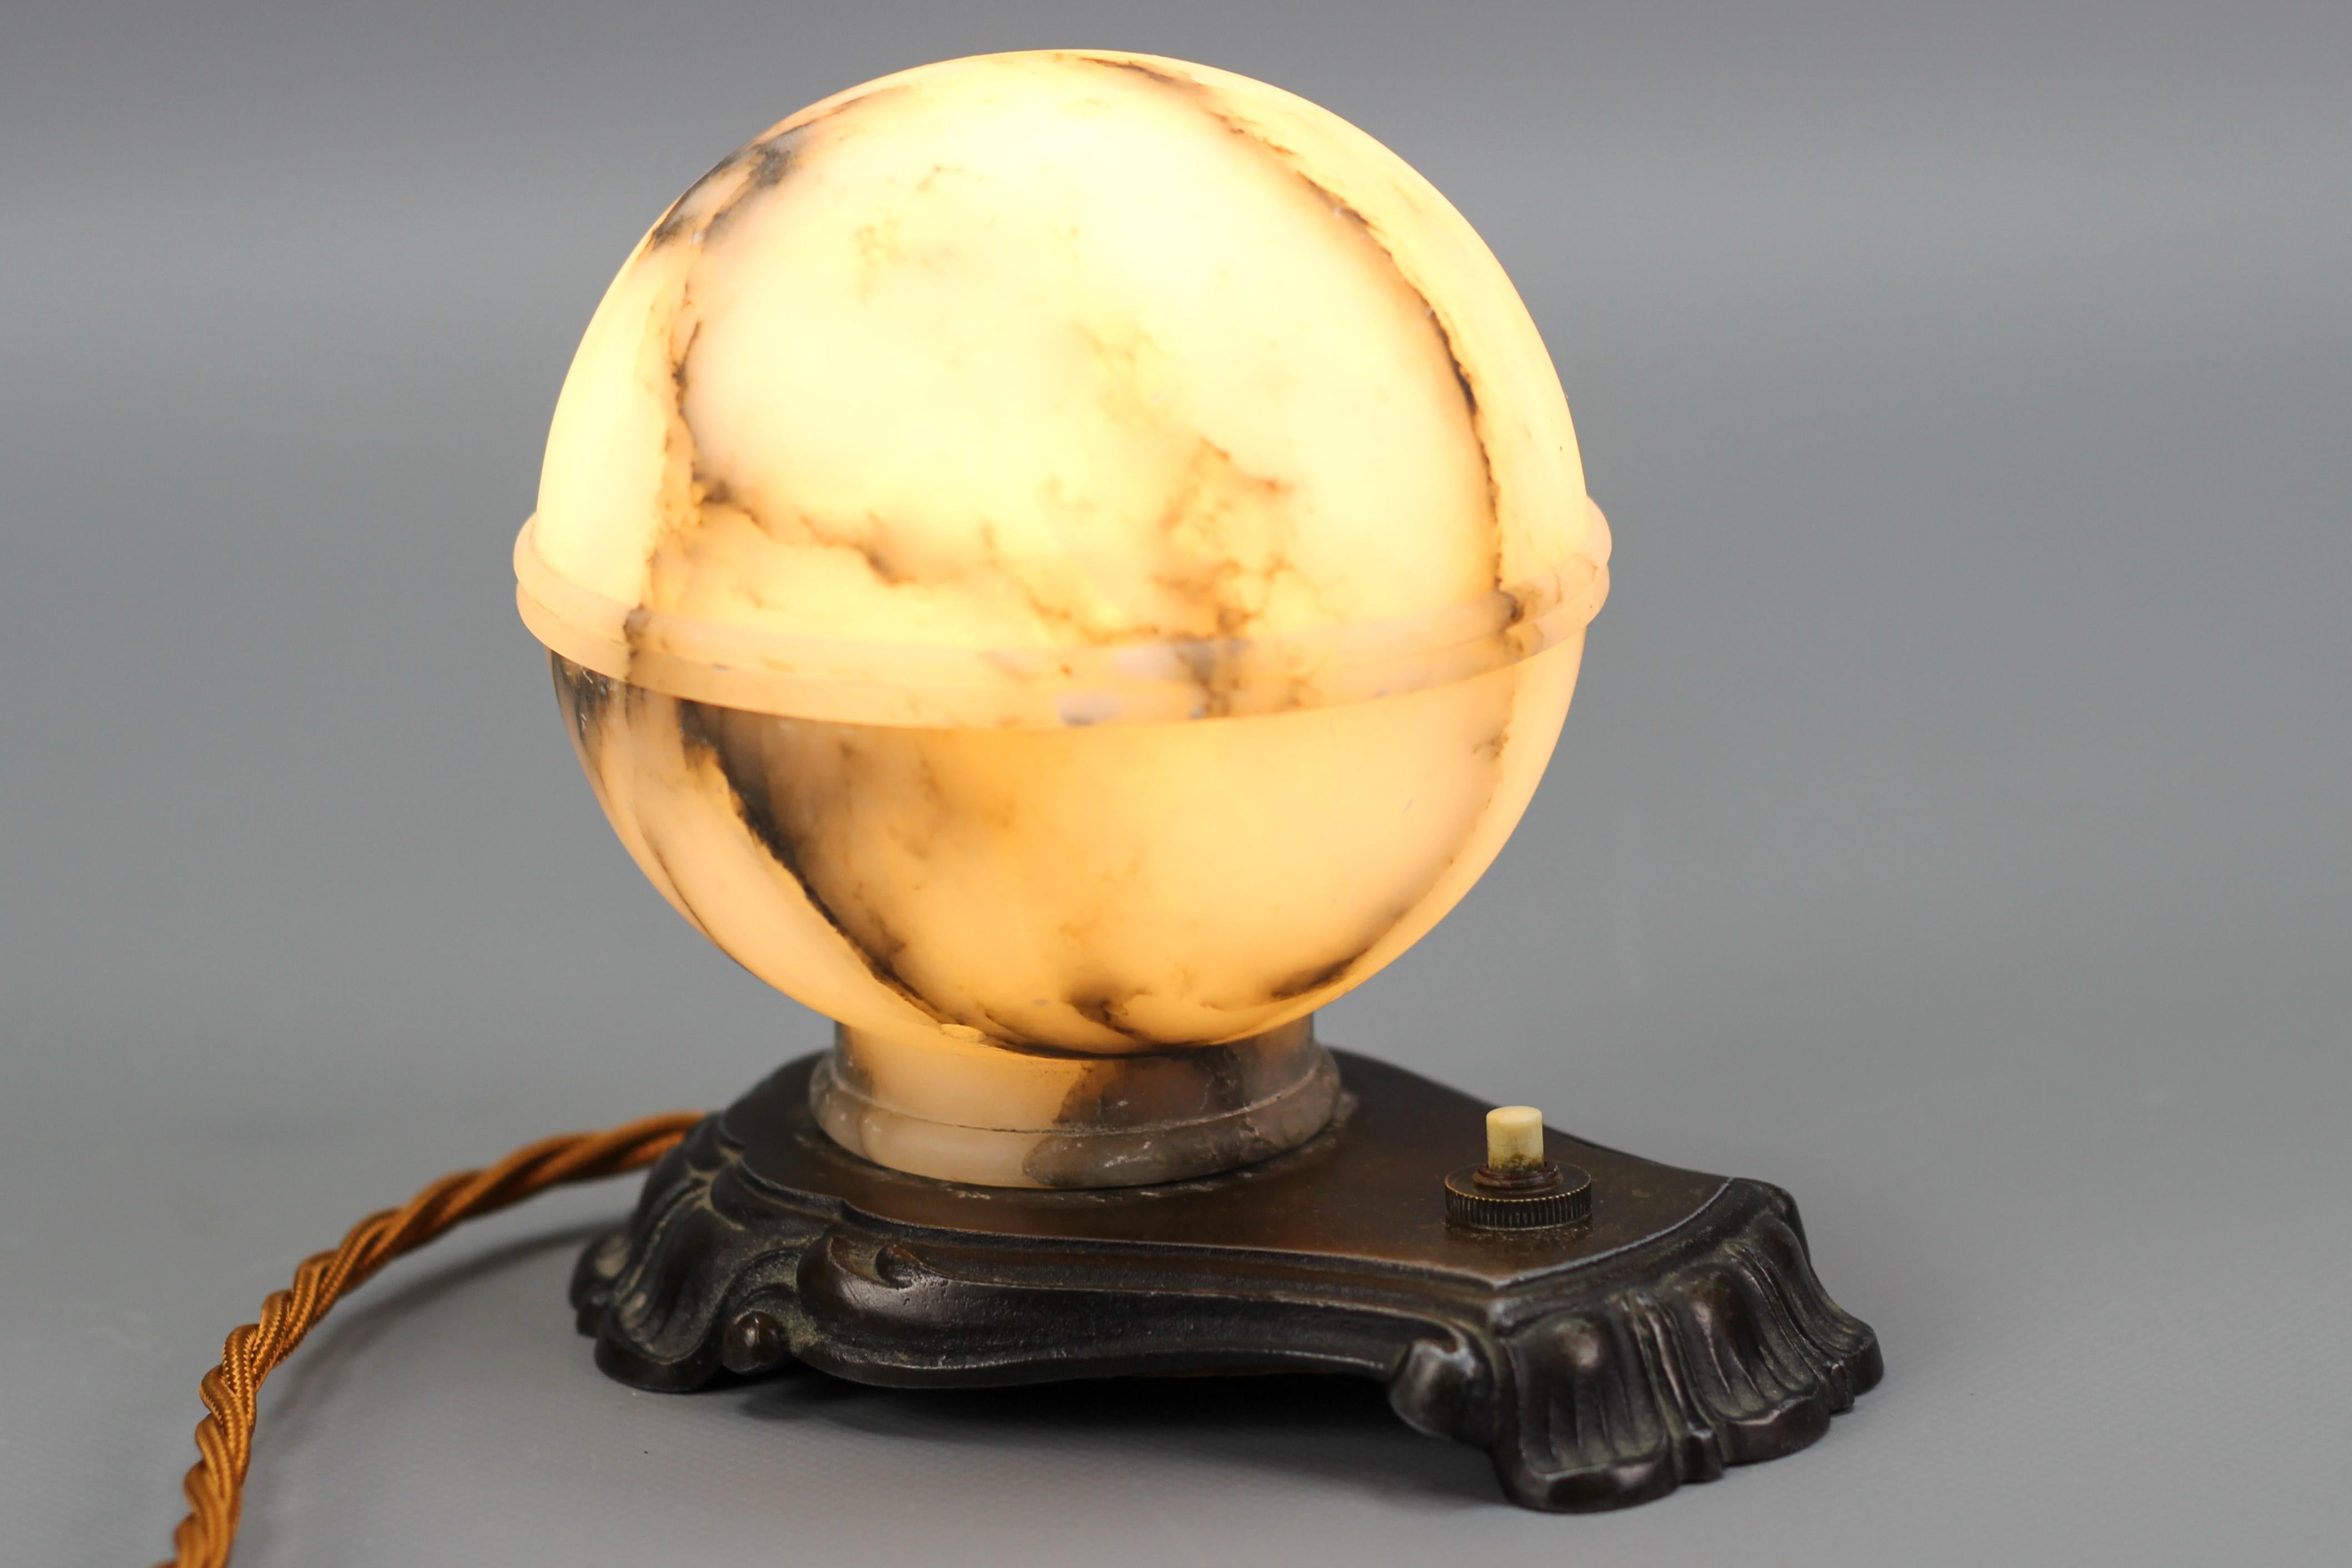 Art Deco White and Black Alabaster globe sphere night table lamp or mood lamp, France, circa the 1930s.
Absolutely adorable night table or mood lamp made that consists of a round lampshade made of two parts of white alabaster with black and dark